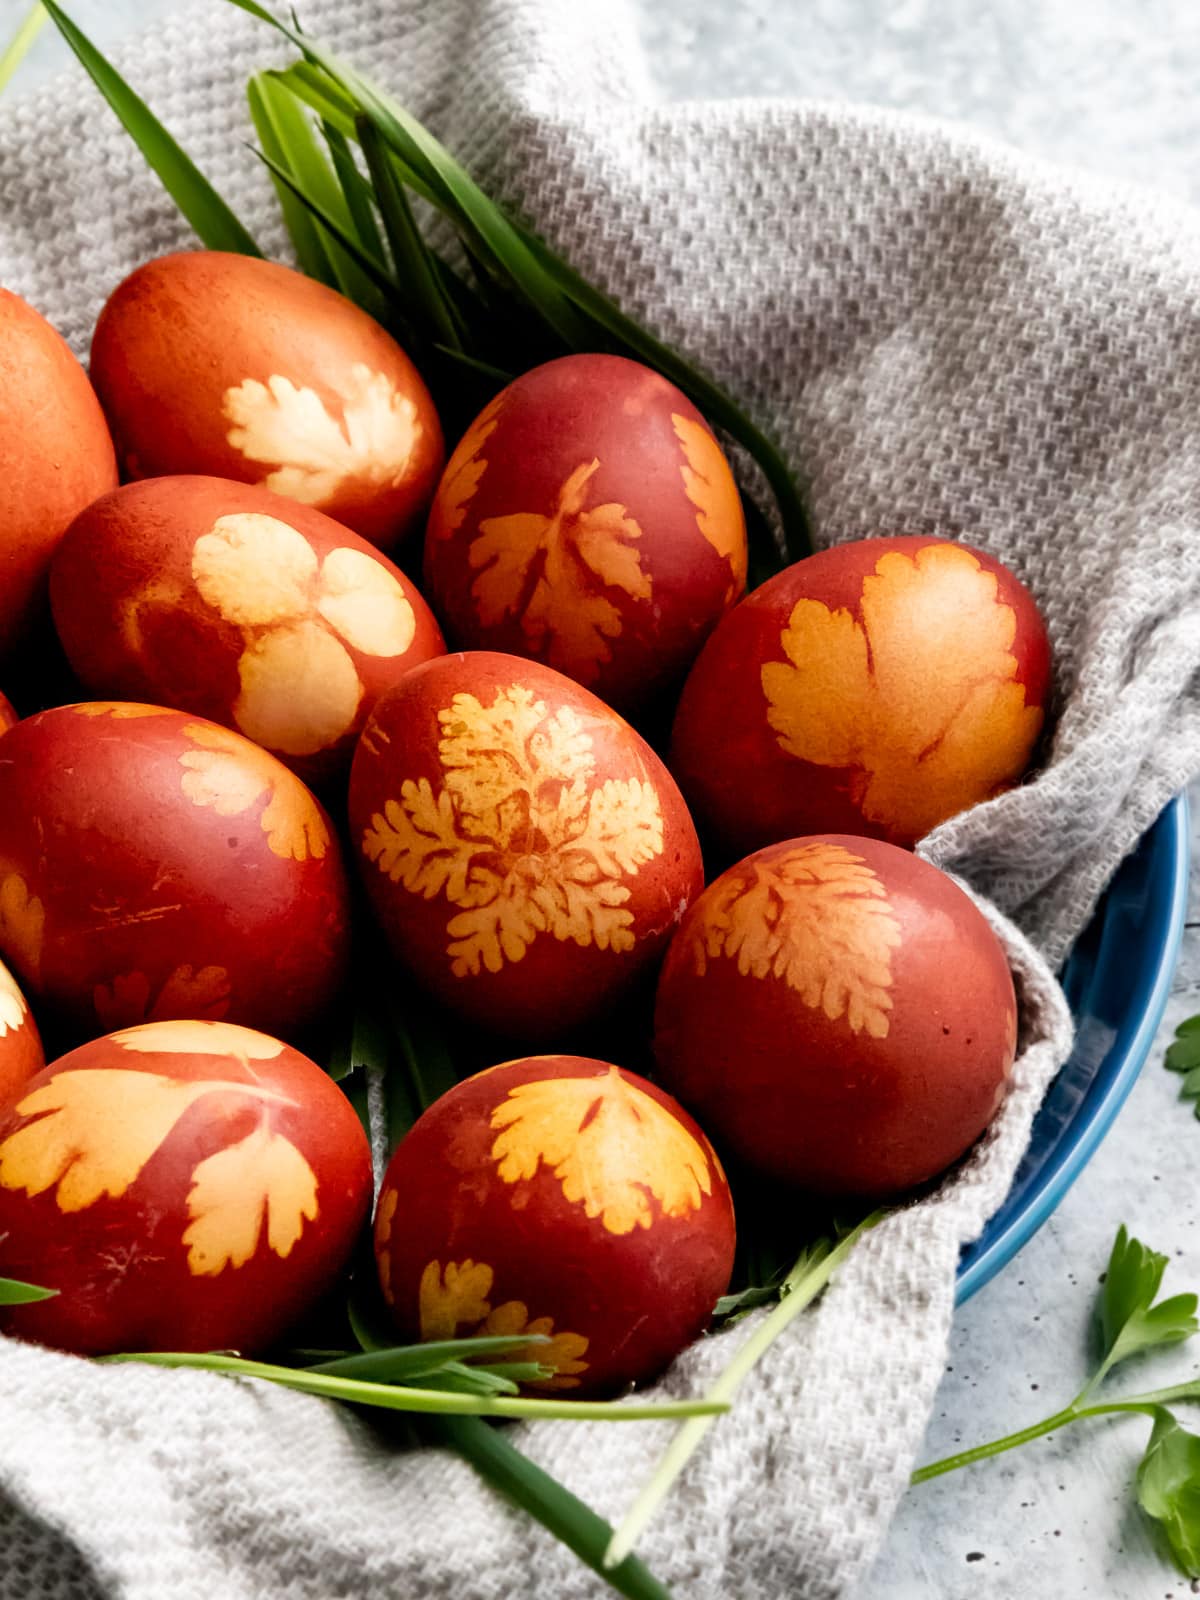 An easy guide to achieve rustic-looking Natural Easter Eggs using onion skins and fresh herbs. It’s a creative and meaningful activity to do as a family the day or night before Easter day.